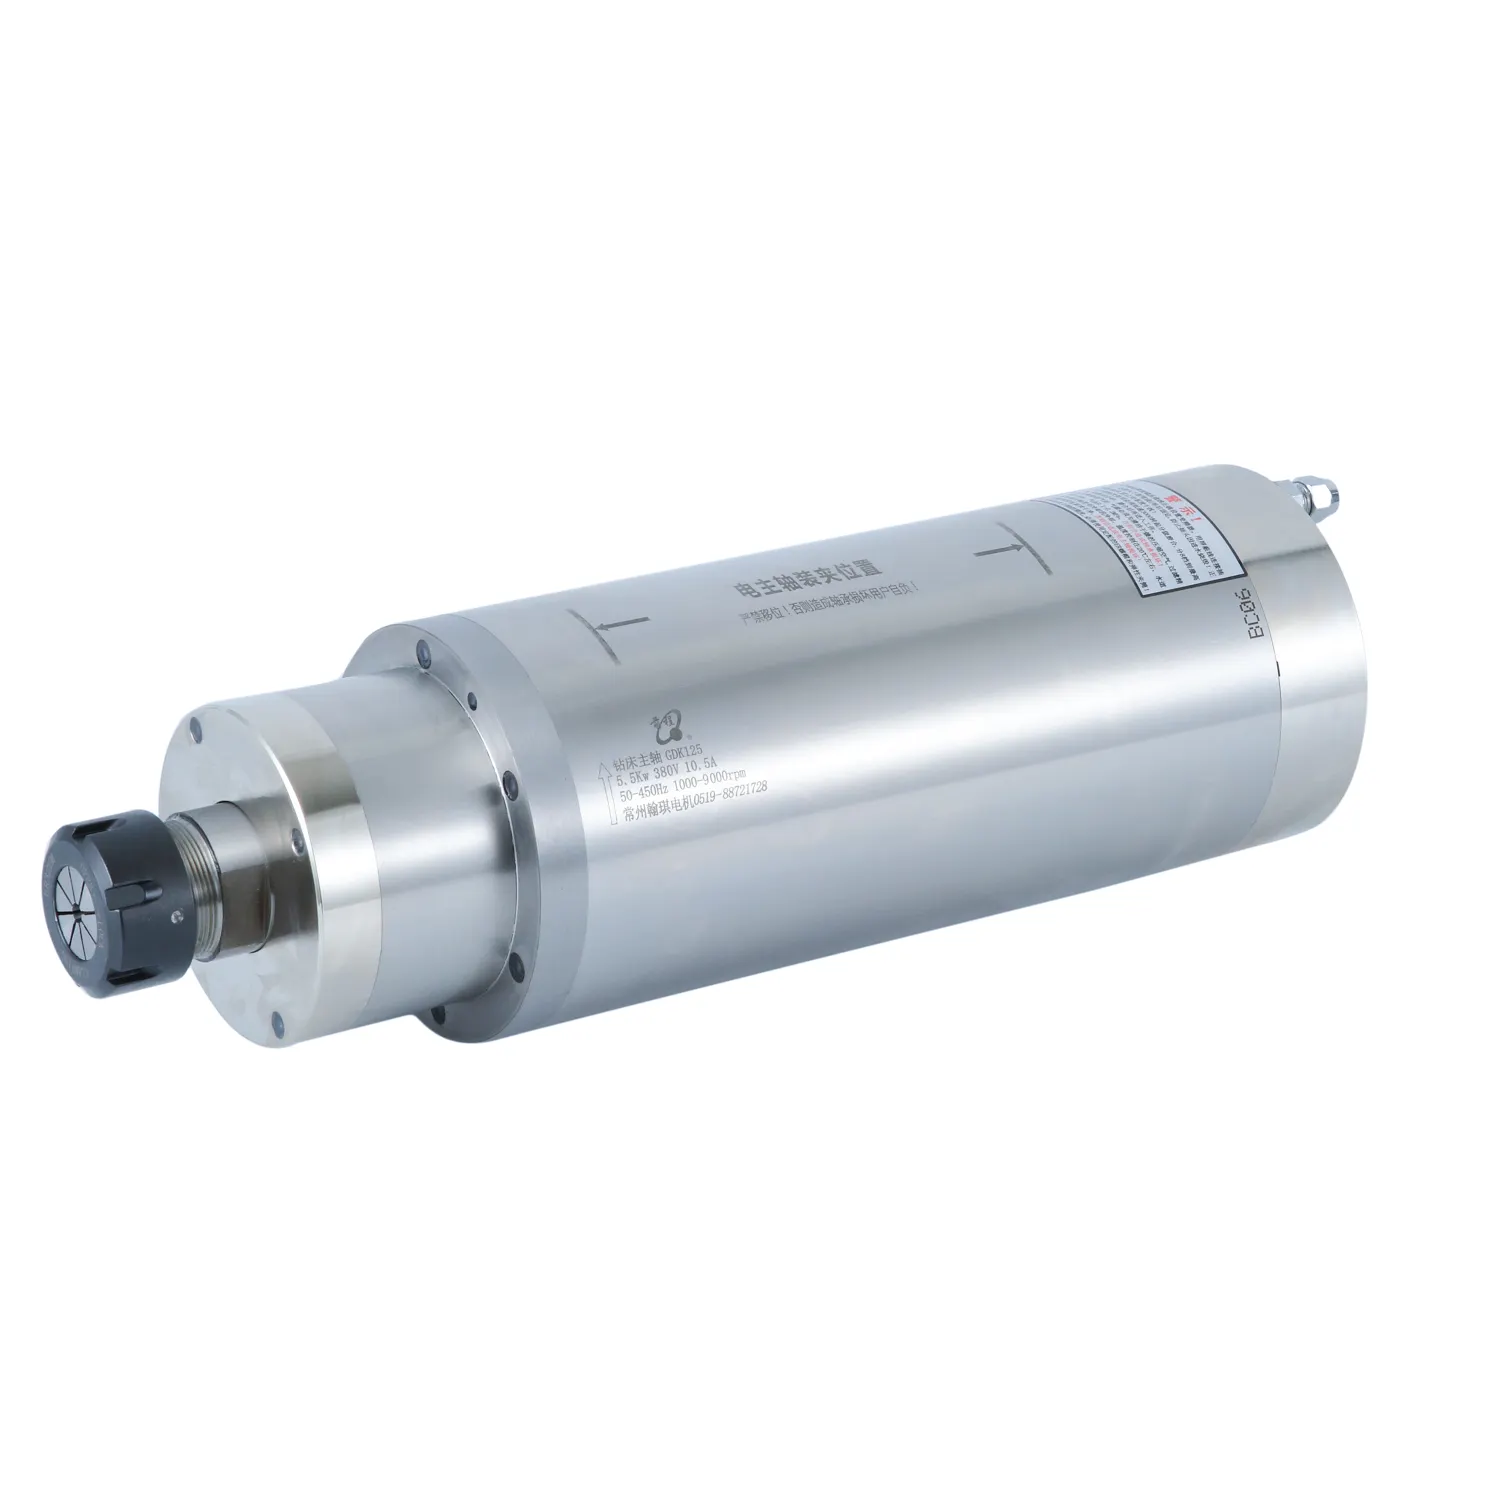 GDK125-9Z/5.5 low speed high torque drilling spindle motor for hole drilling spindle motor